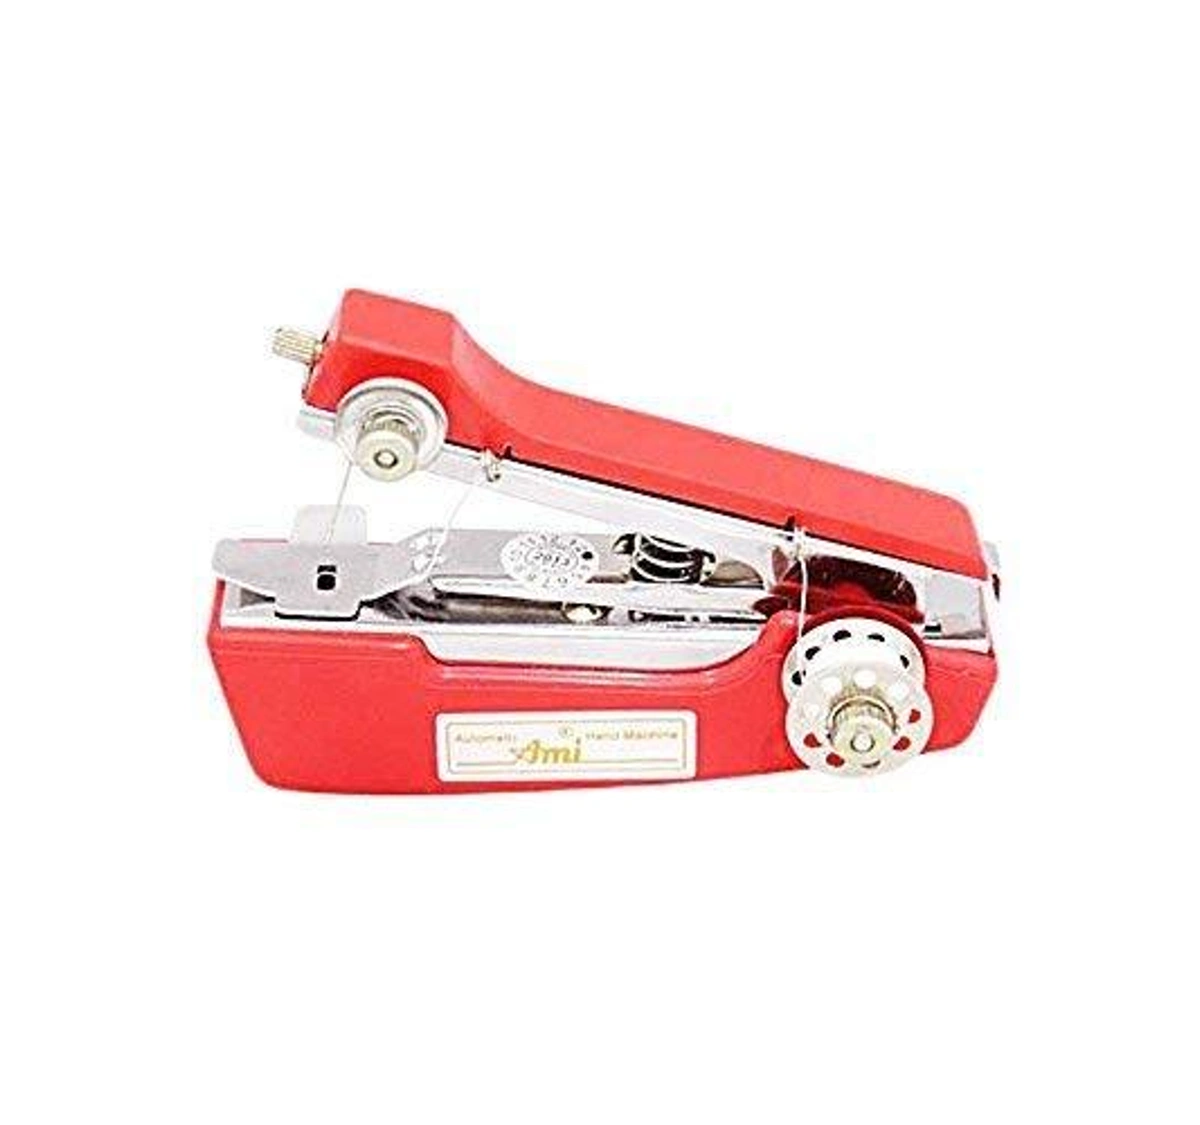 Buy Mini Sewing Machine Handheld Handy Stitch Machine,Craft Sewing Machine,Mini  Lightweight Stitch Handheld Cordless Portable,Portable Clothes Fabric,Mini Sewing  Machines Stapler G430 at Sehgall